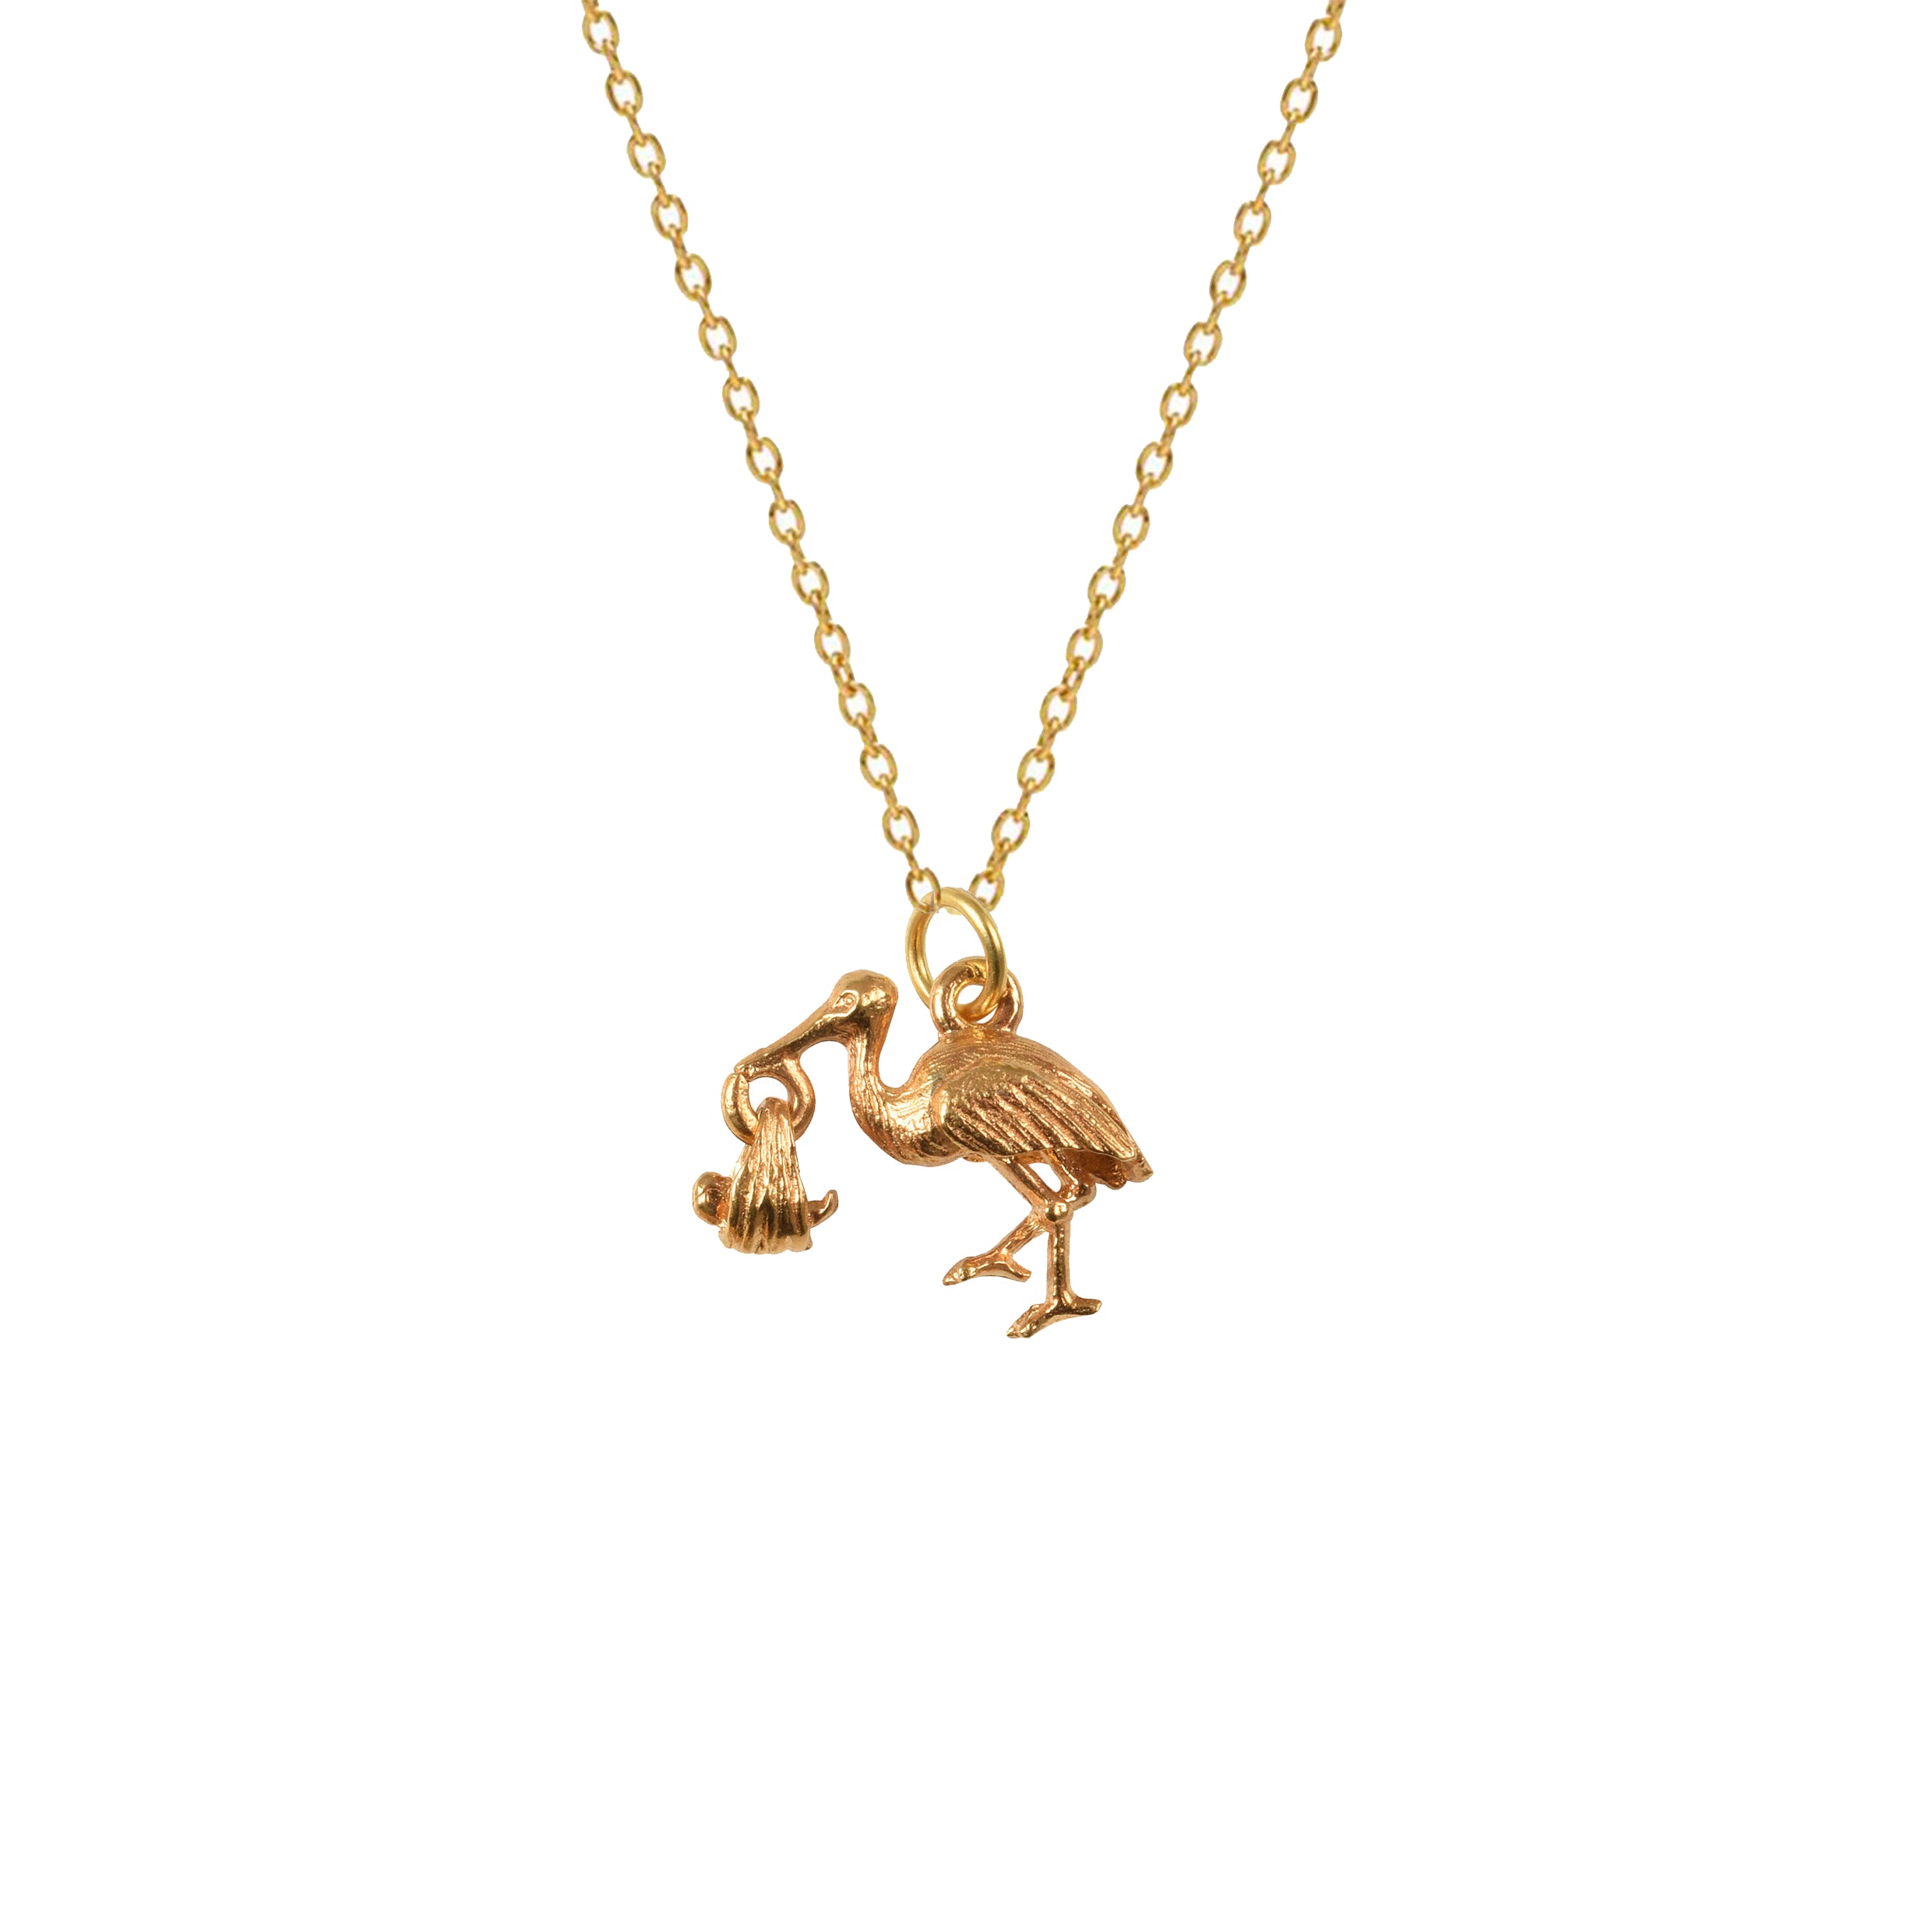 Stork with Baby Charm - Mirabelle Jewellery